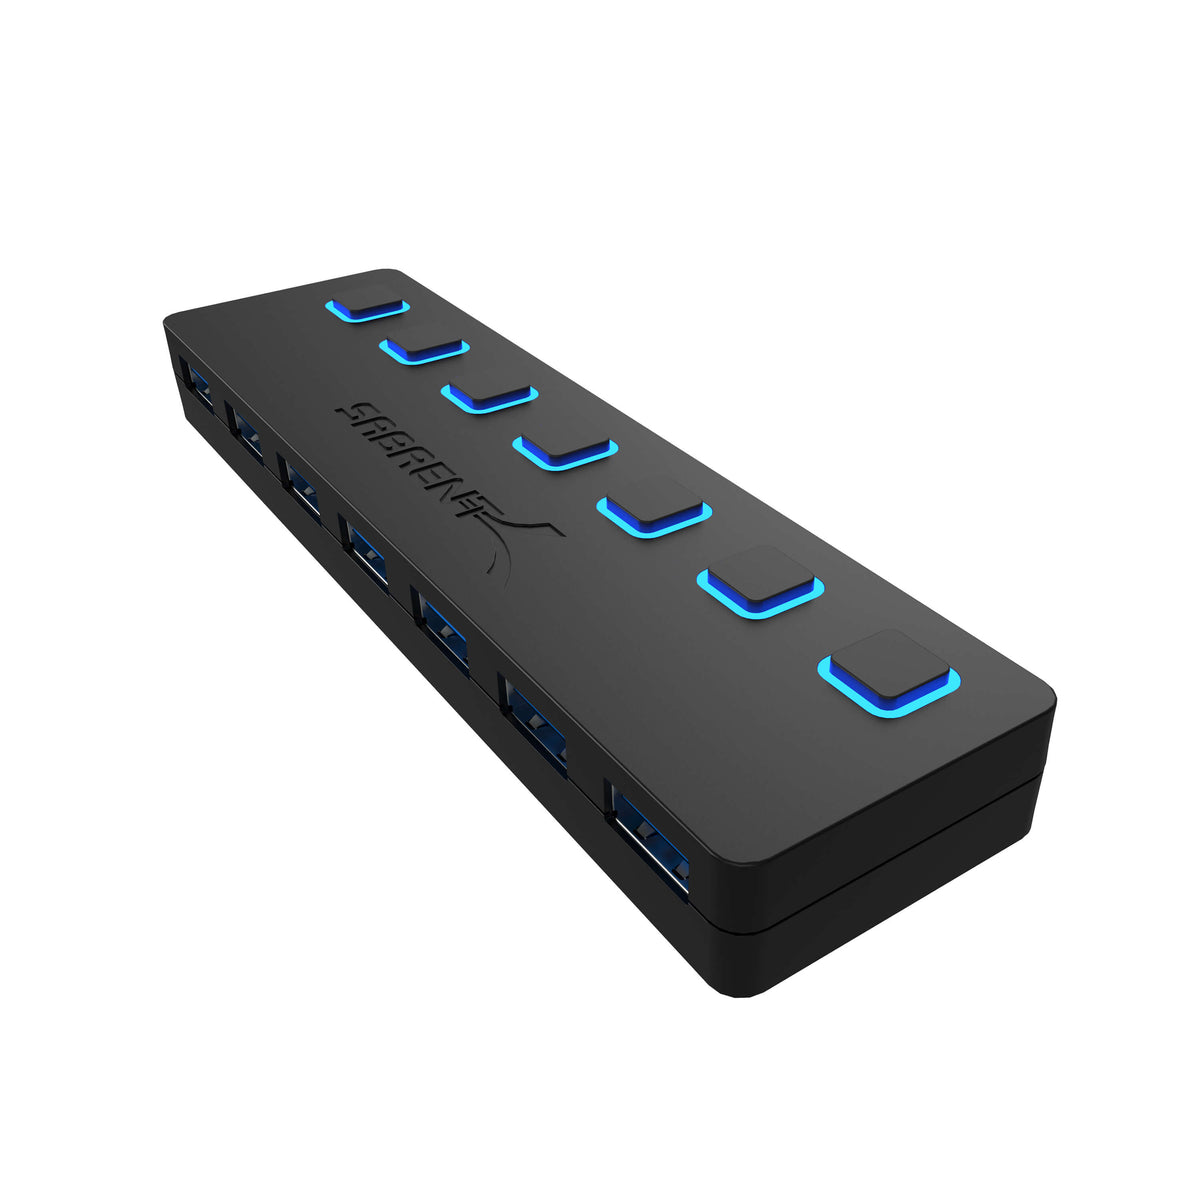 7 Port USB 3.0 Hub With Power Switches